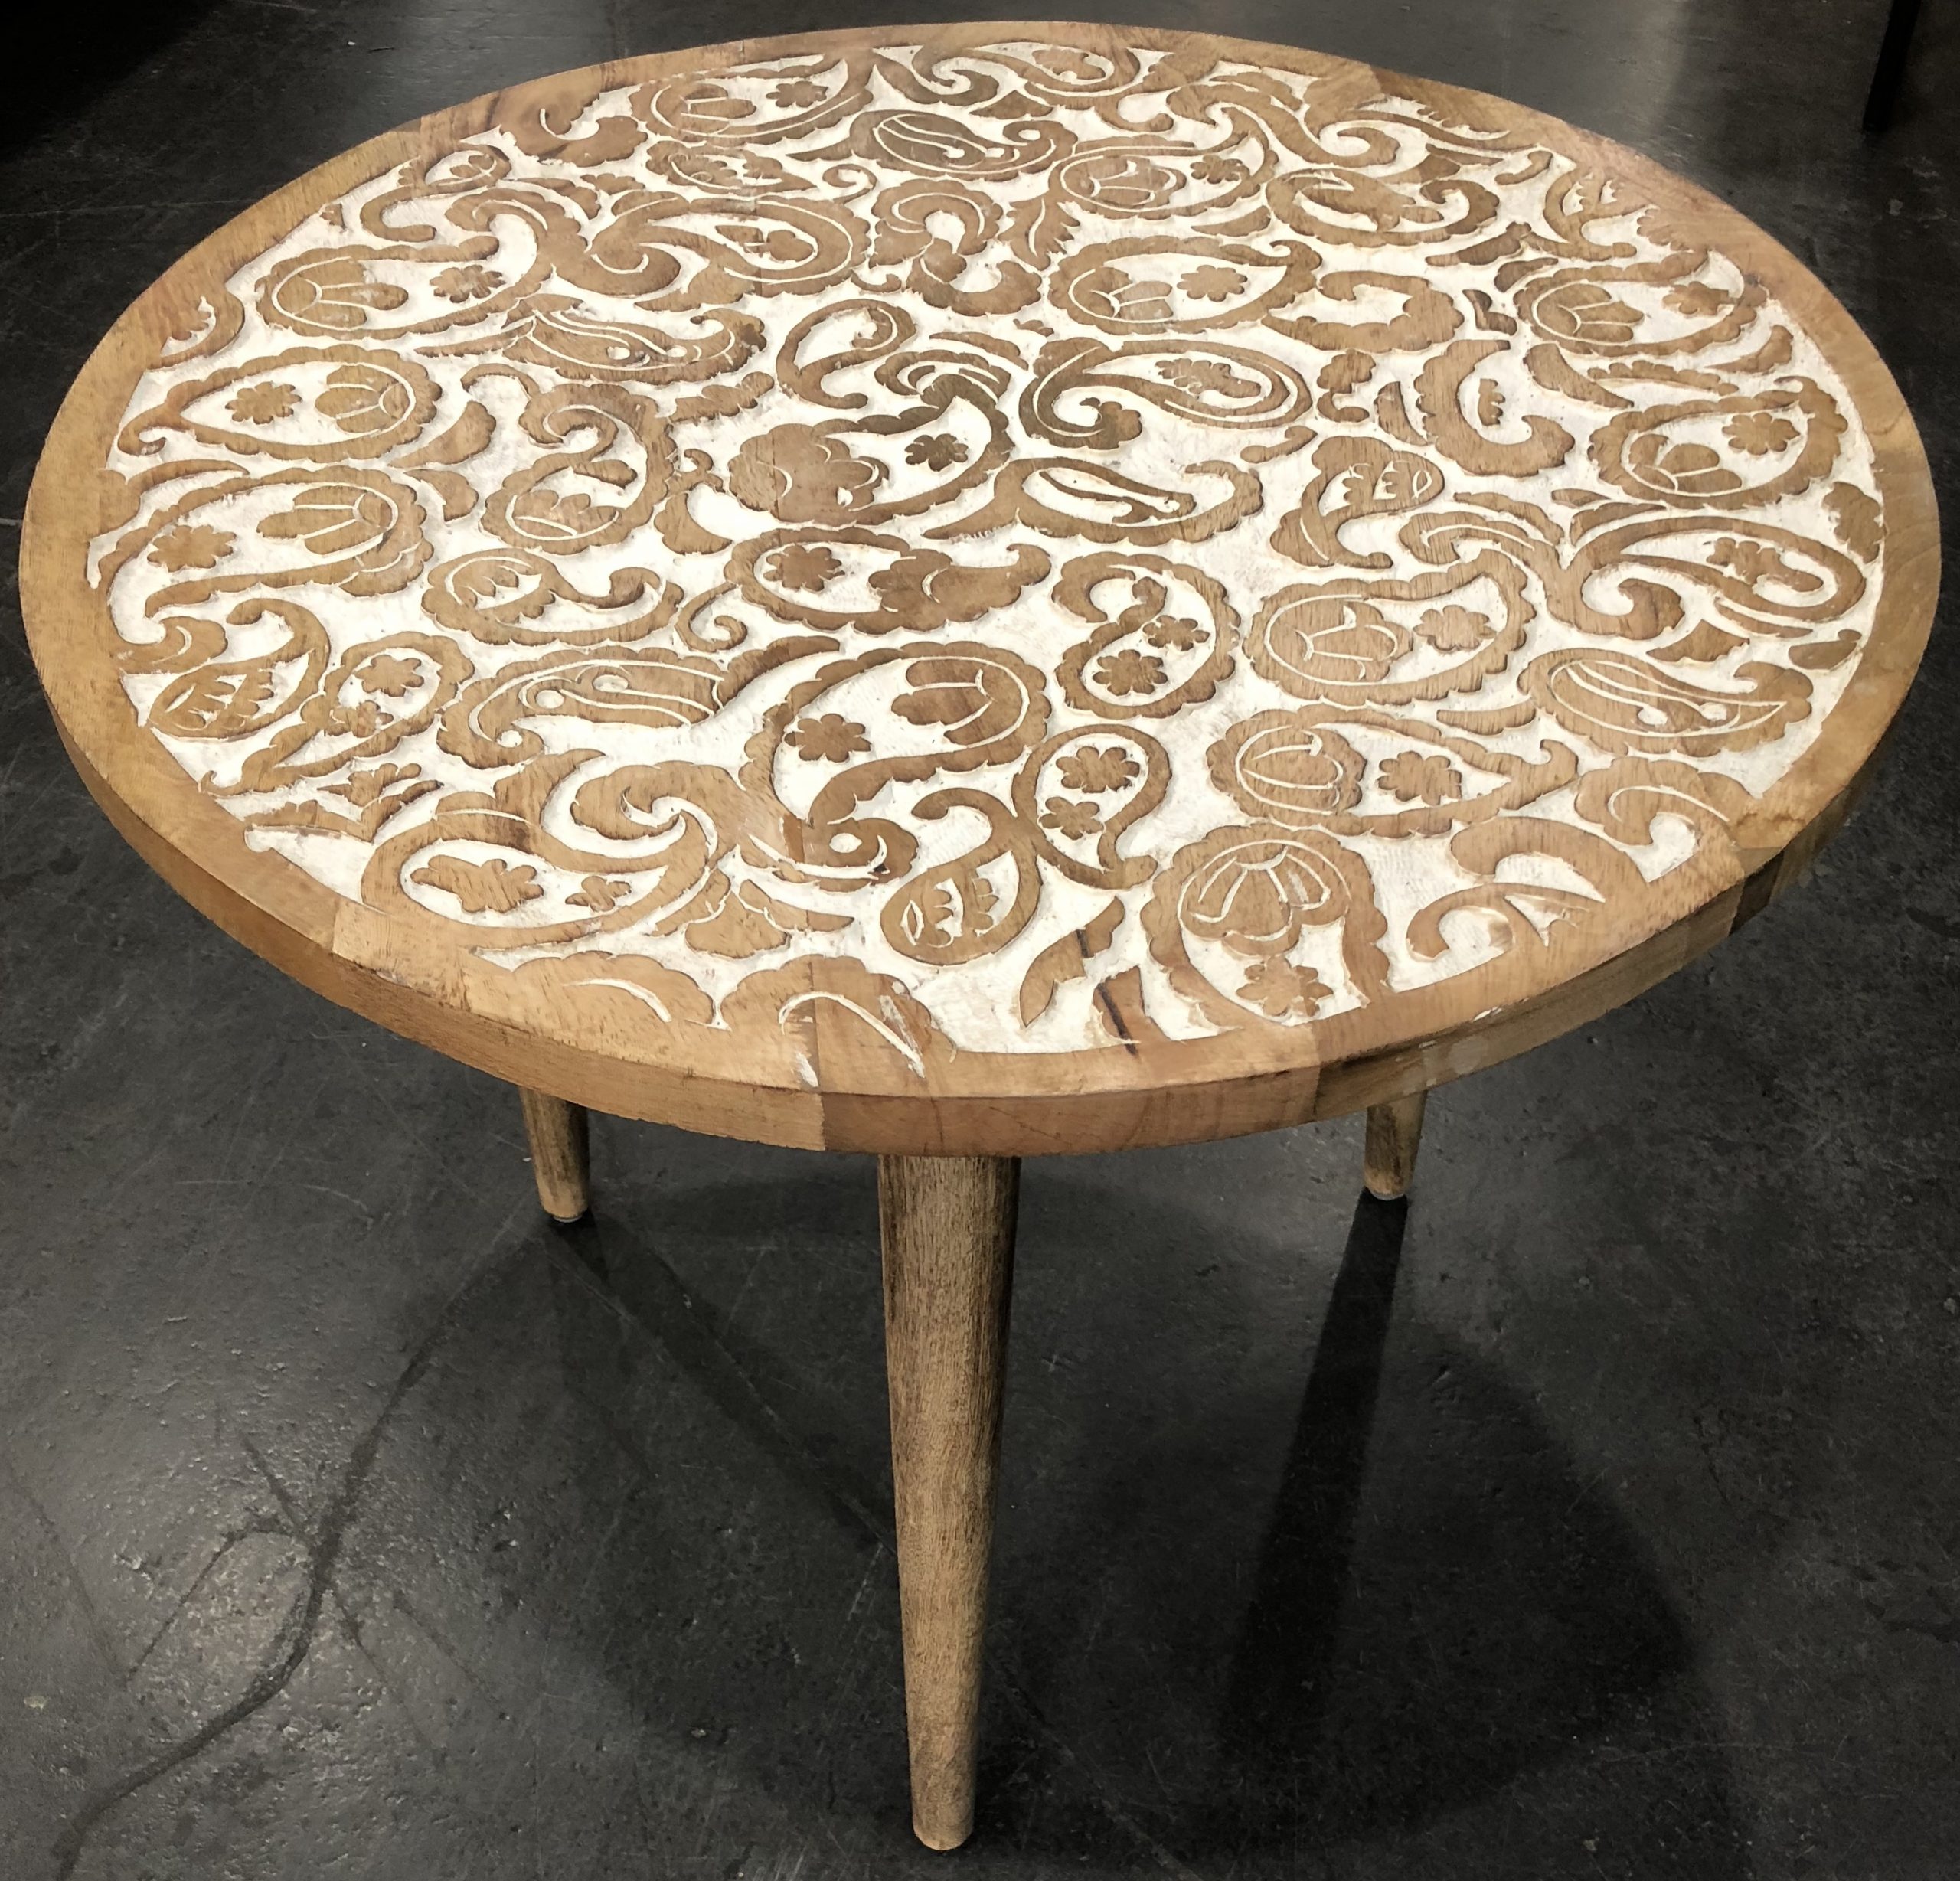 Side Table Abez Wooden Carved Round W600 x H500mm